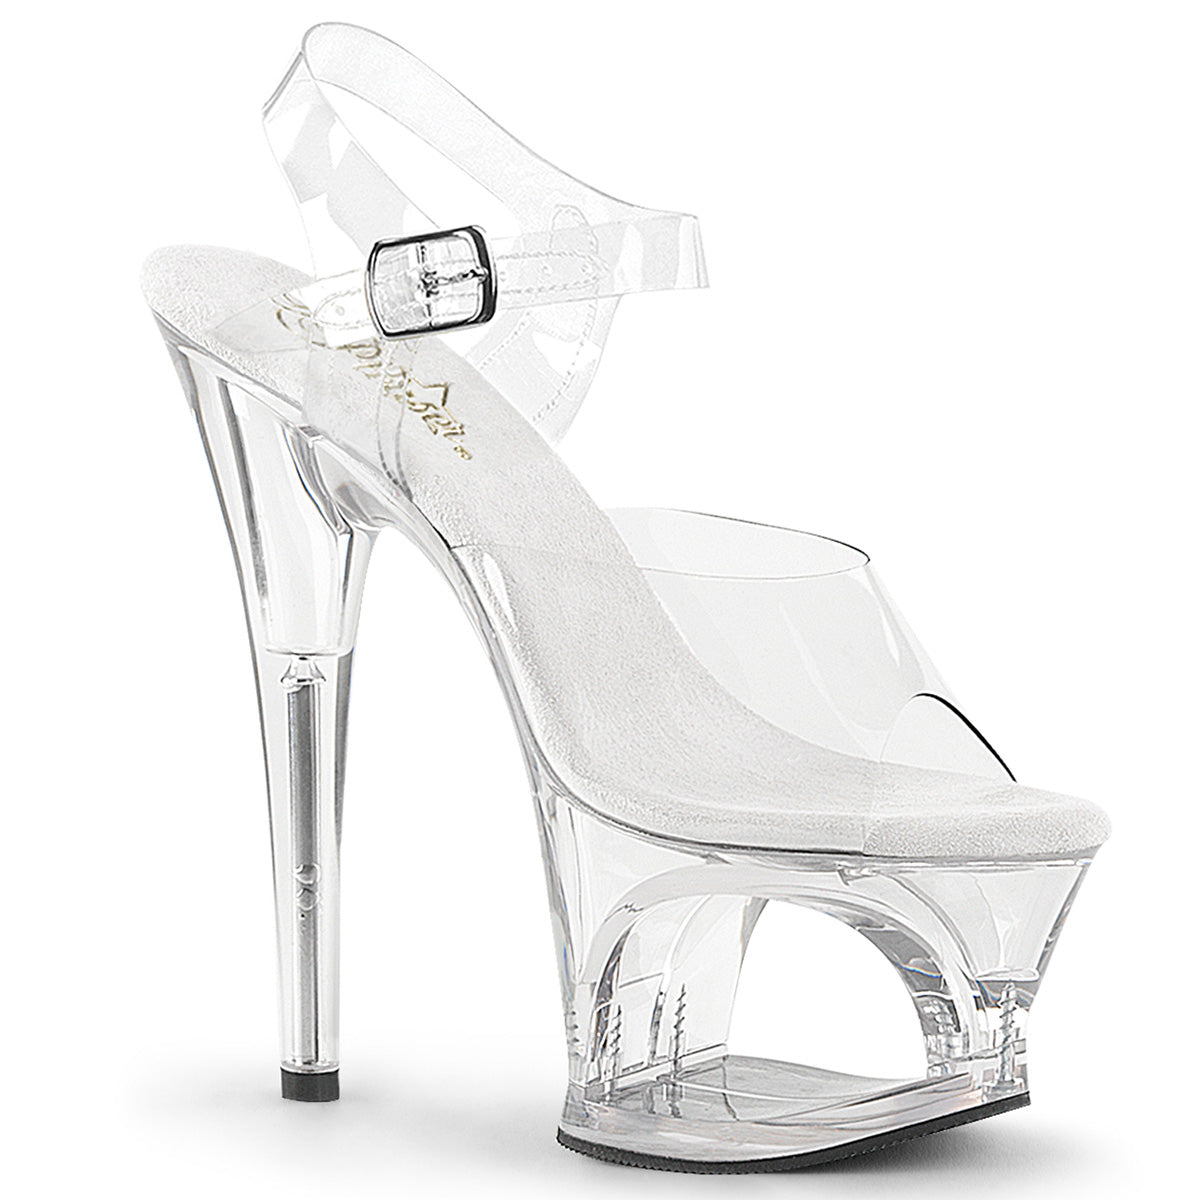 MOON-708 Pleaser 7 Inch Heel Clear Pole Dancing Platforms-Pleaser- Sexy Shoes